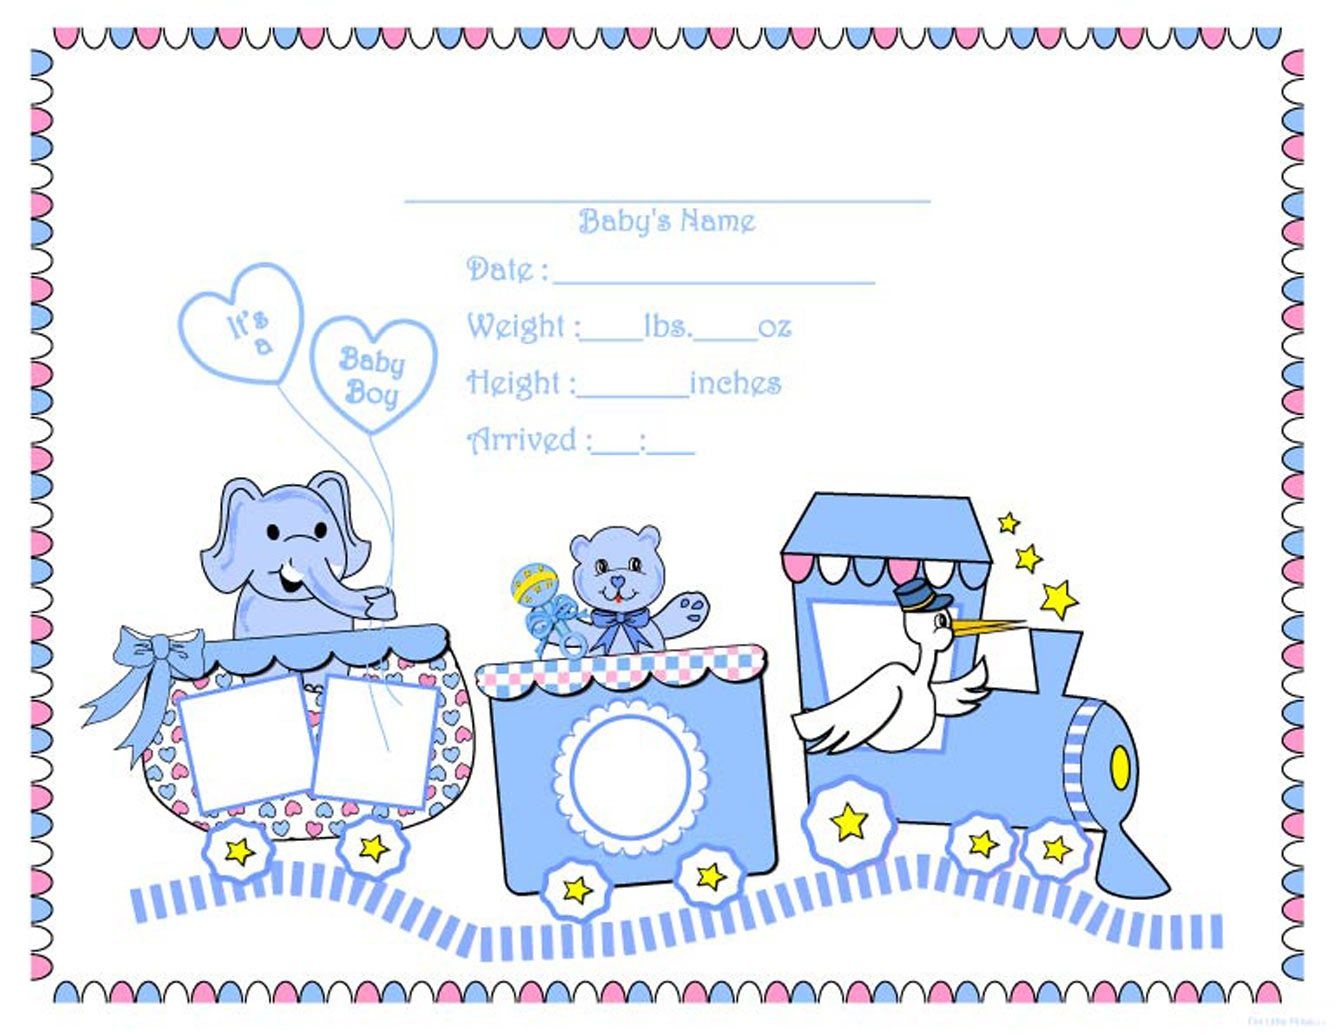 Free Printable Digital Scrapbook Template Pages New Born Baby